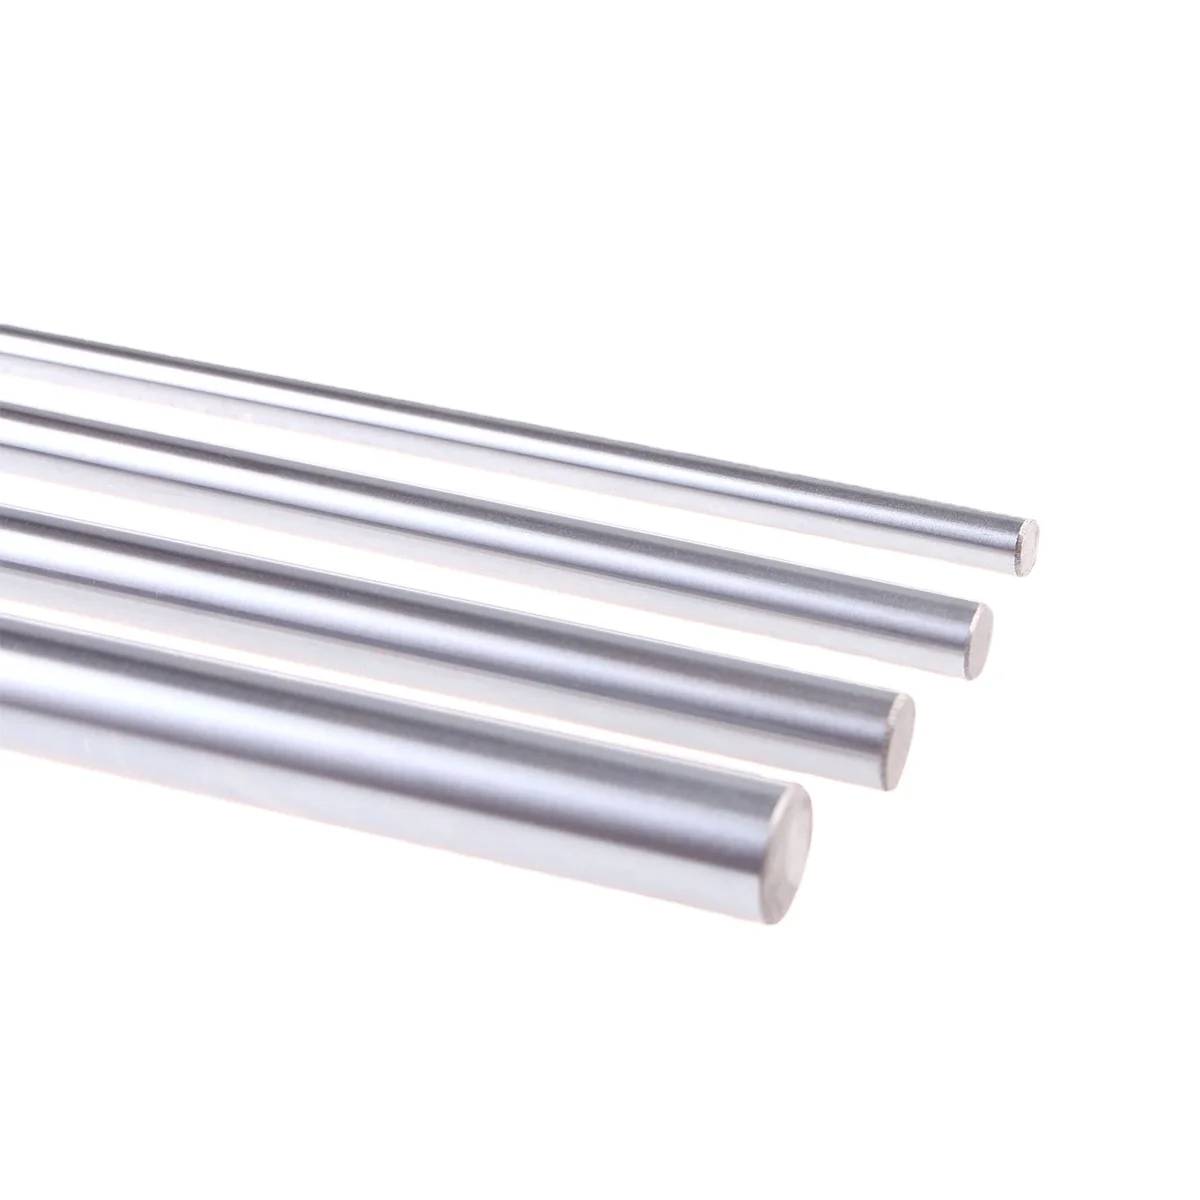 2pcs 6mm 8mm 10mm 12mm OD Linear Shaft Cylinder Rail Chrome Plated Round Smooth Rods Optical Axis for CNC 3D Printer Parts 2pcs shf8 shf10 shf12 shf8 shf10 shf12 aluminum linear rod rail shaft support cnc router parts 3d printer parts